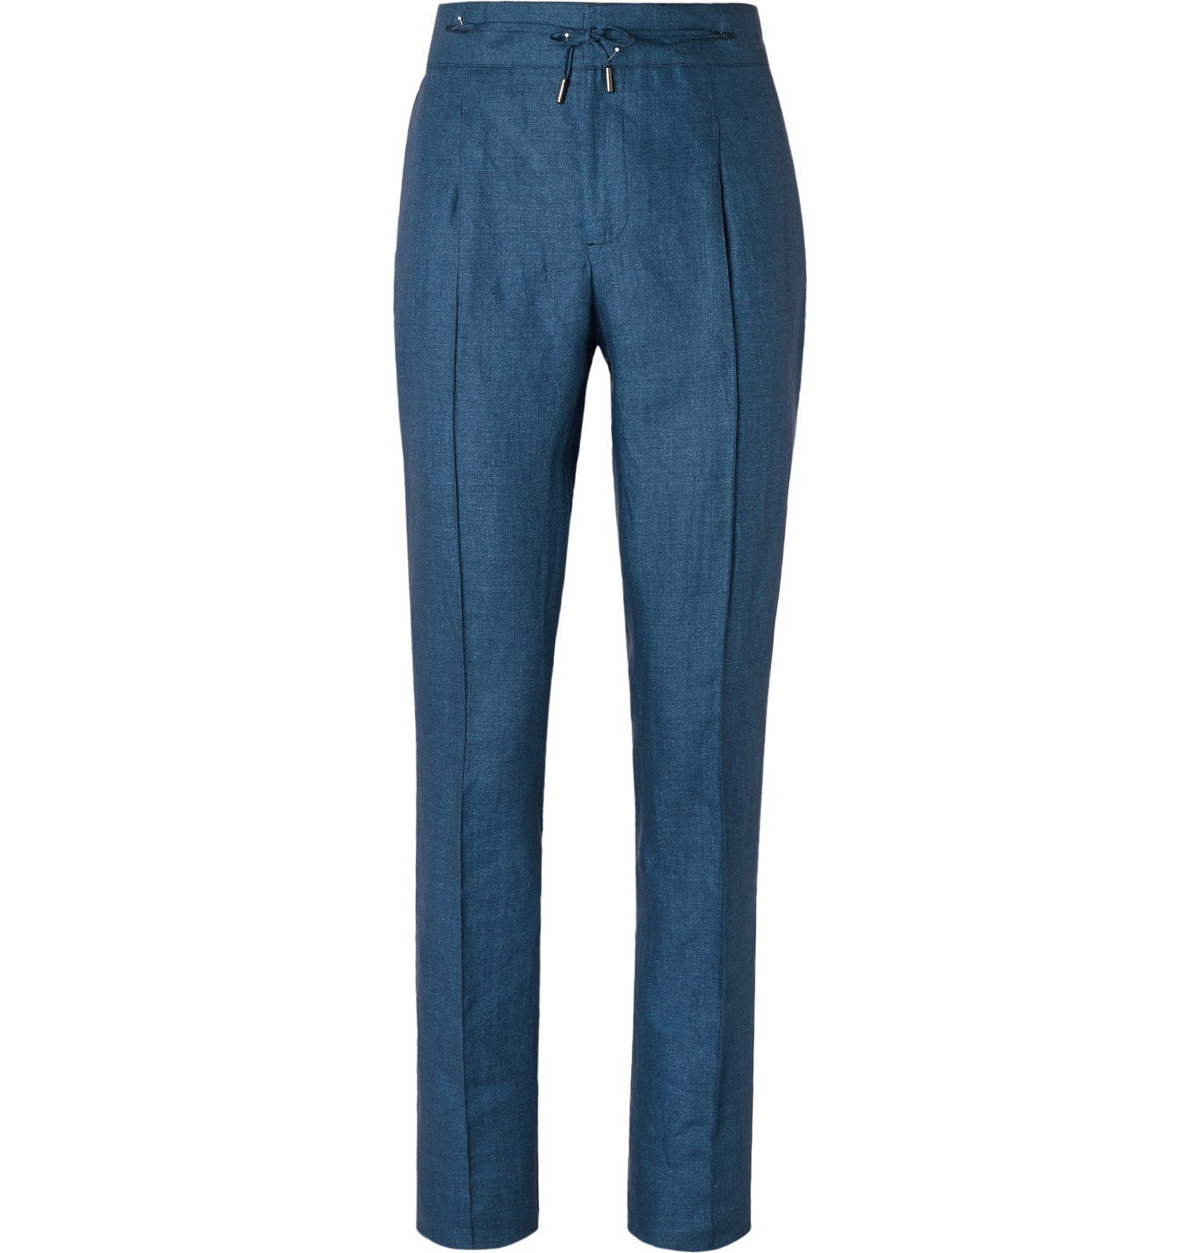 Isaia - Linen Drawstring Trousers - Blue Isaia